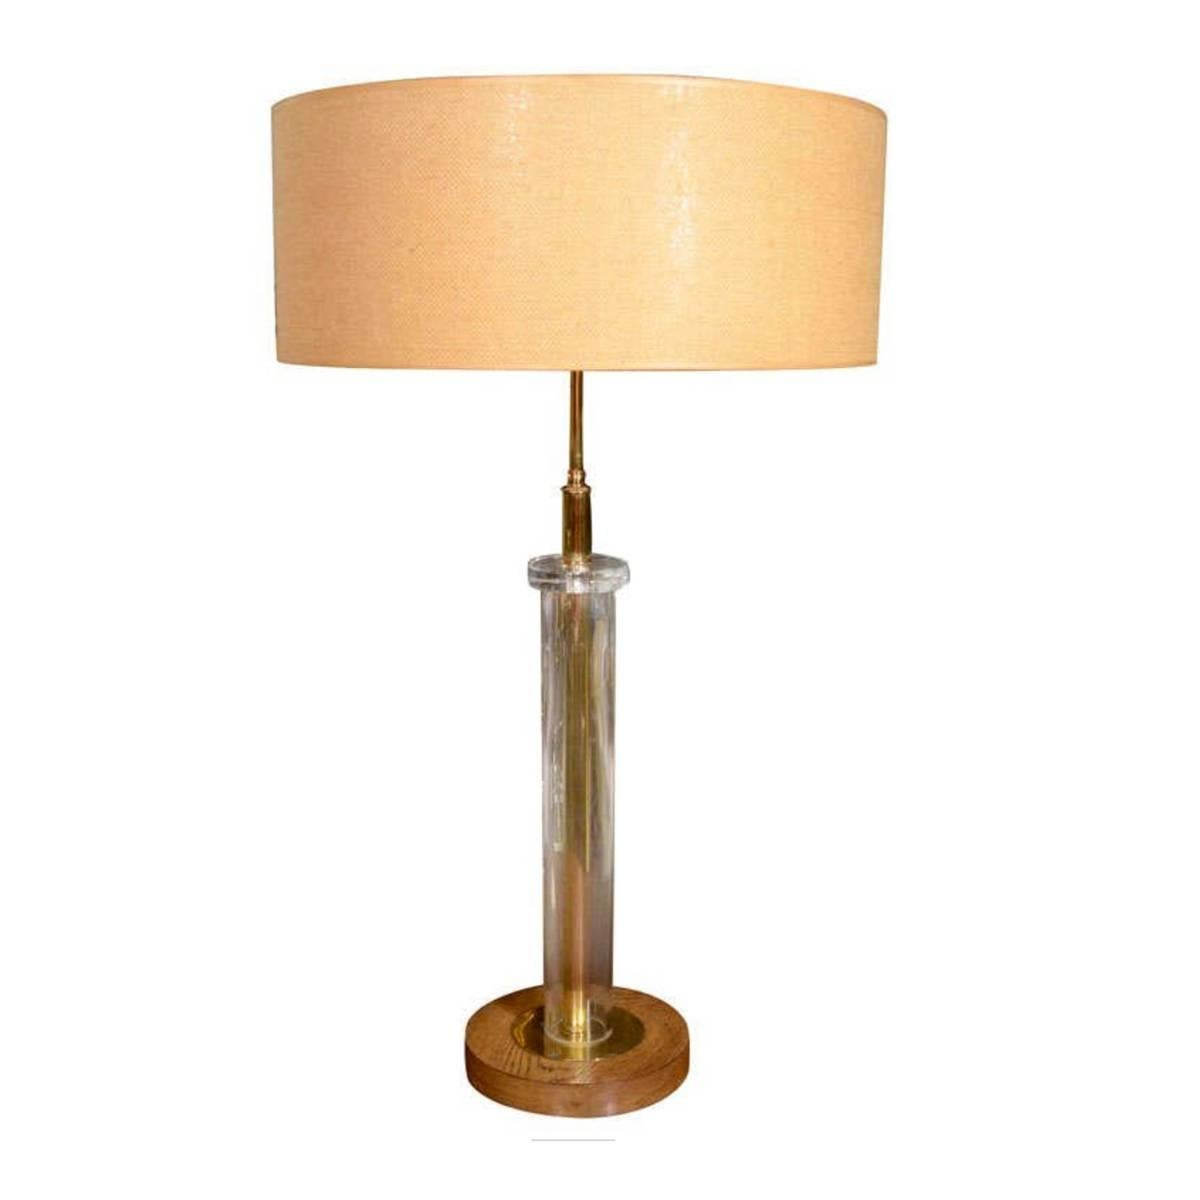 Glass Table Lamp by Gilbert Rohde, American, 1950s For Sale